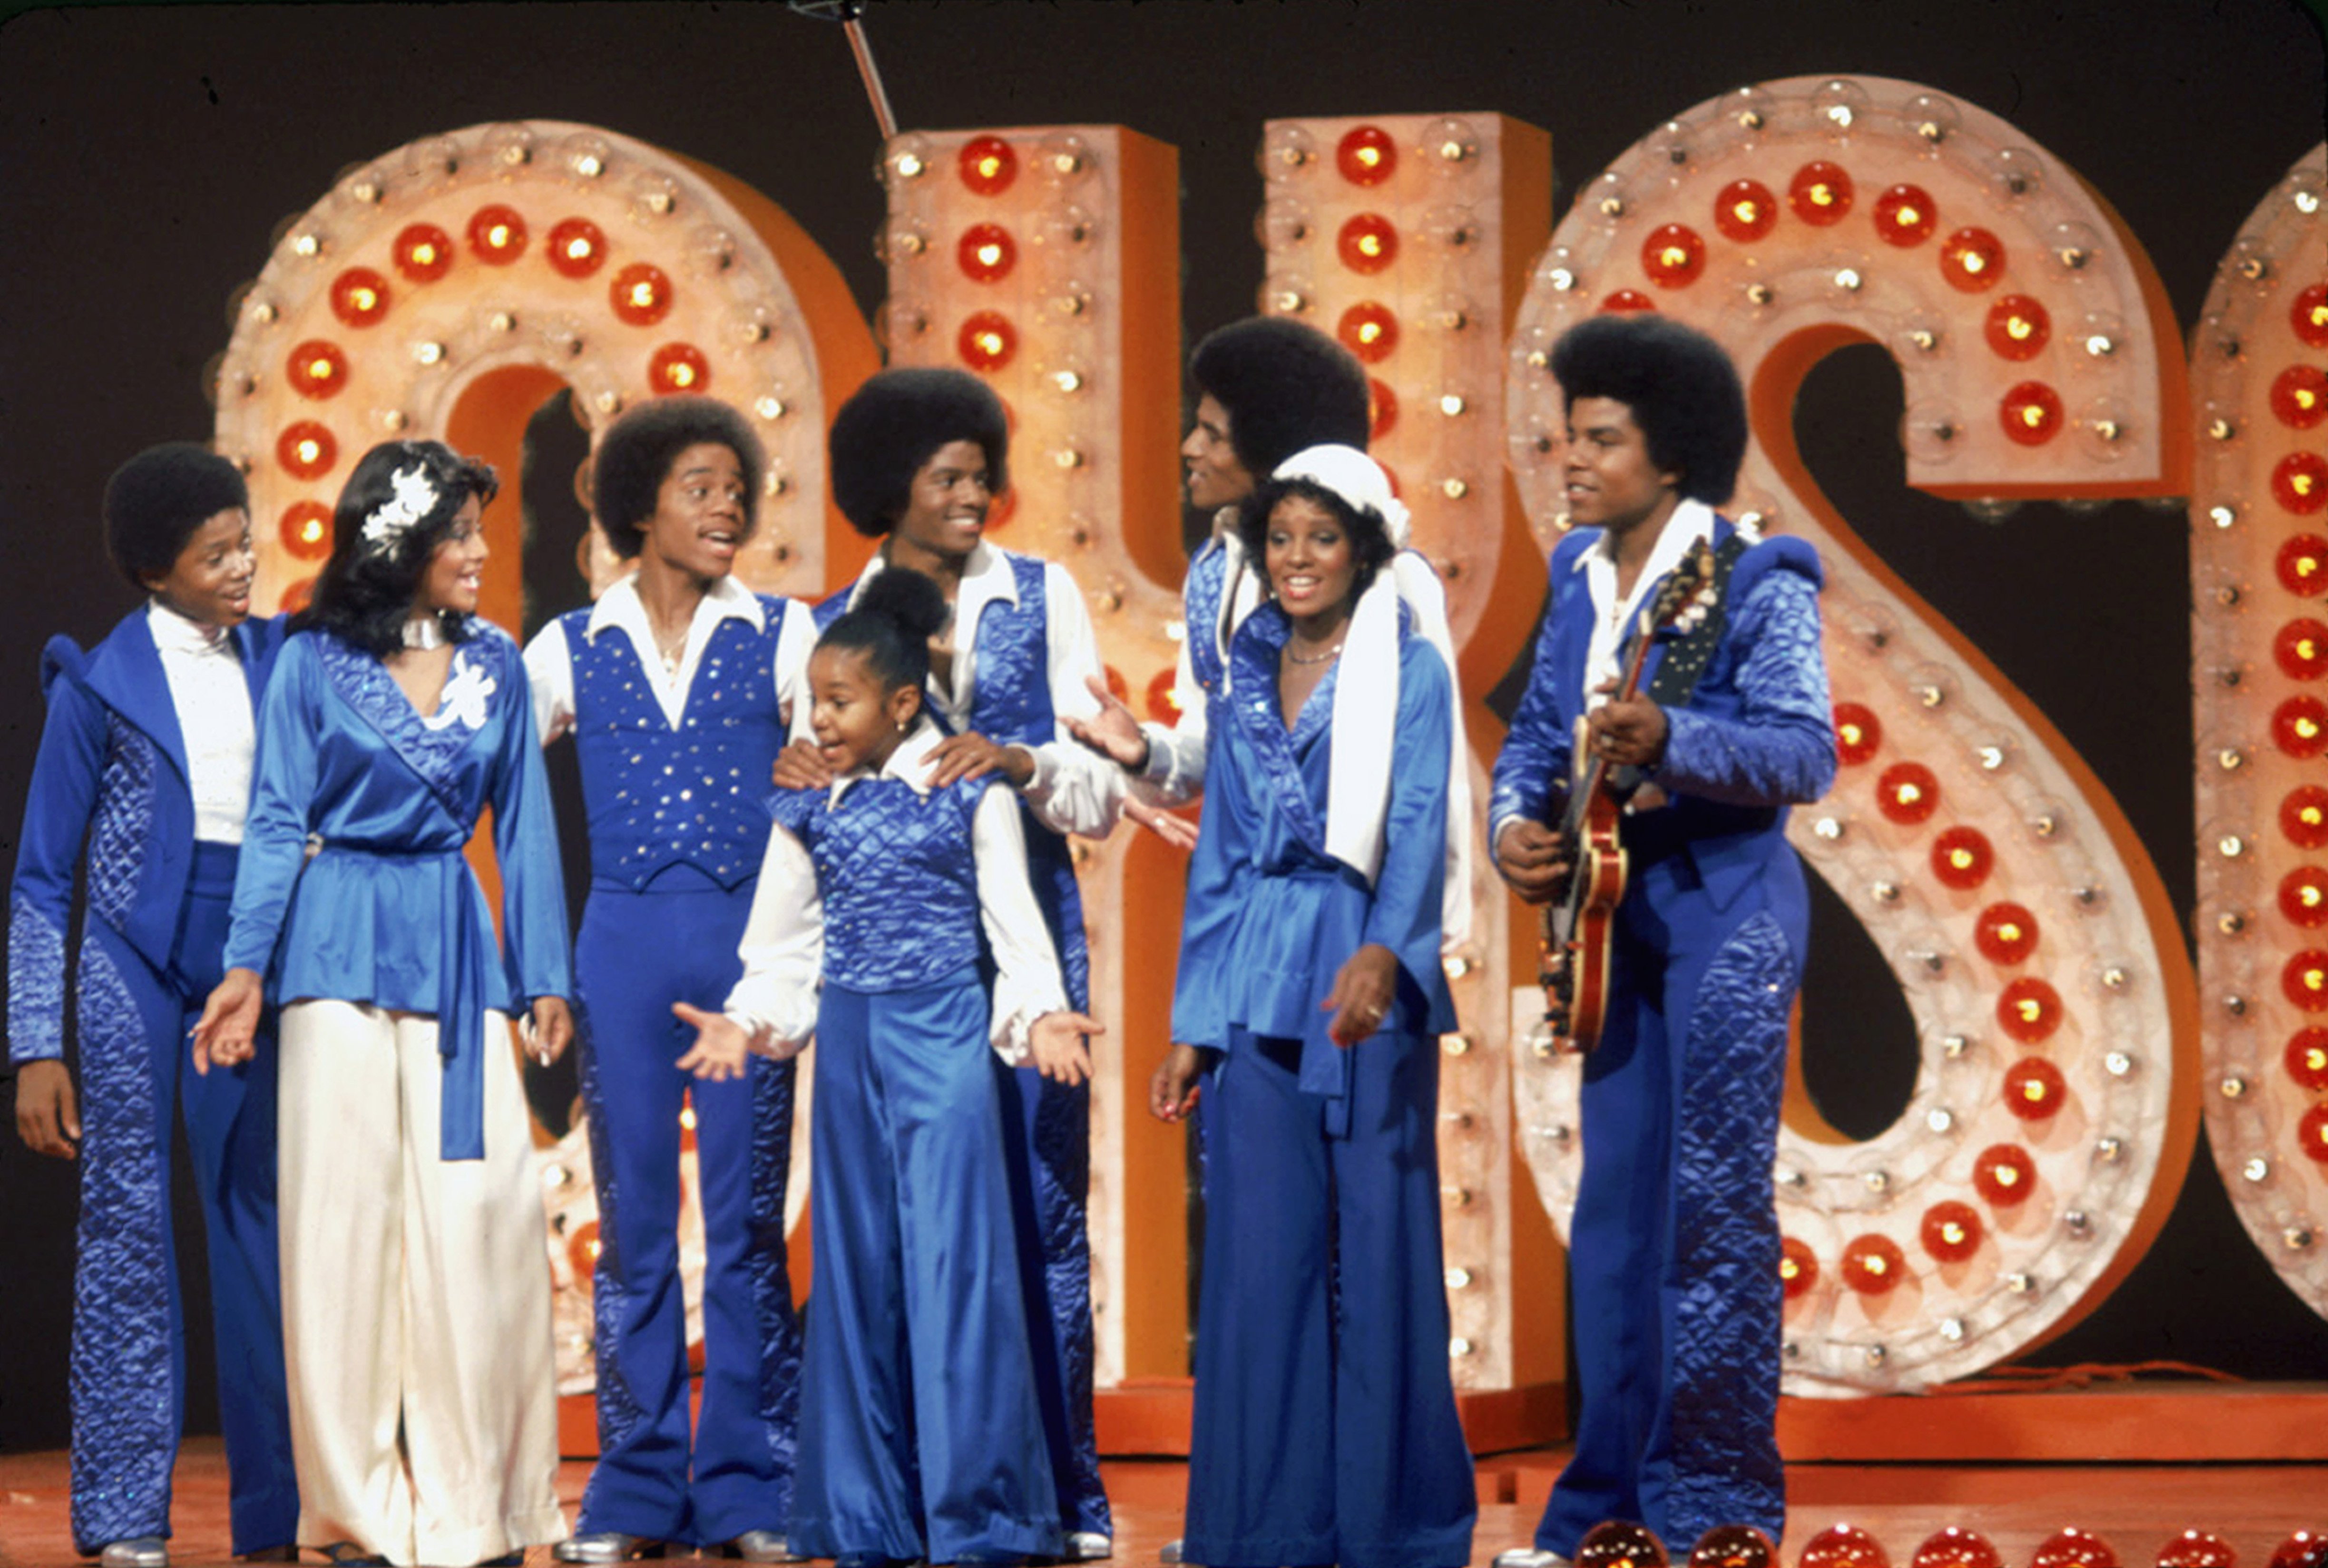 The Jackson family film a TV show at Burbank Studios, California, on November 13, 1976. From left to right, Randy, La Toya, Marlon, Janet, Michael, Jackie, Rebbie, and Tito | Photo: Getty Images